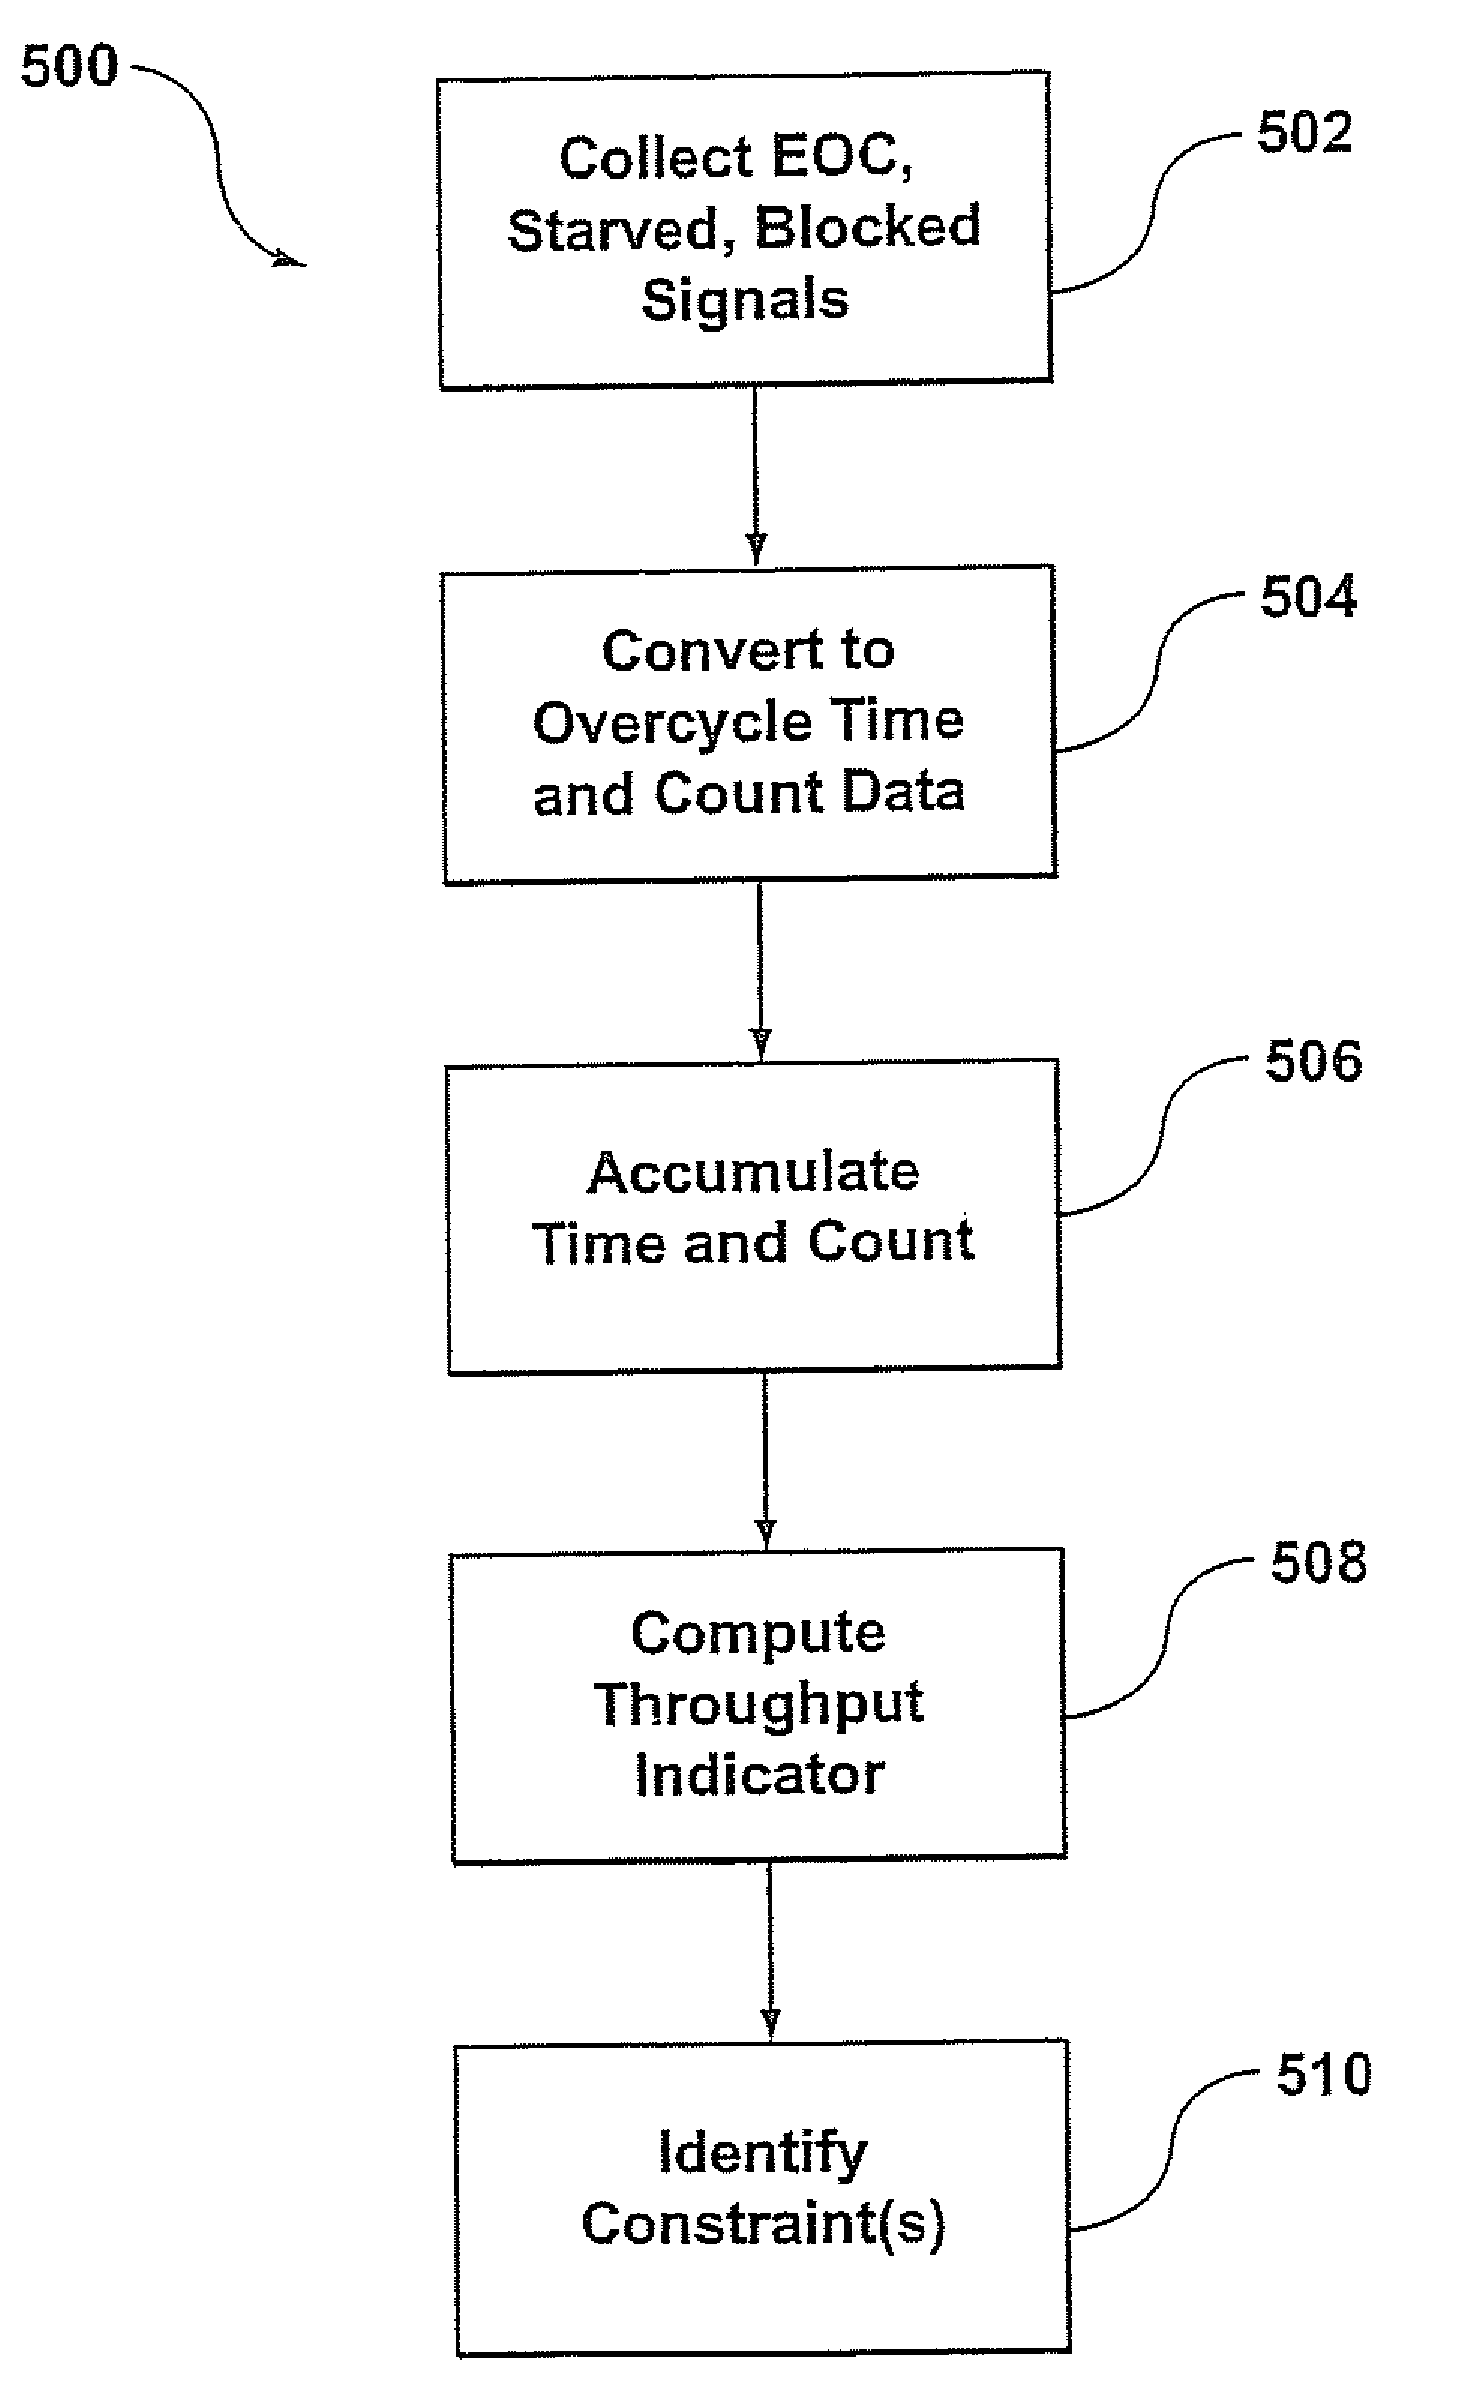 System and method of monitoring and quantifying performance of an automated manufacturing facility